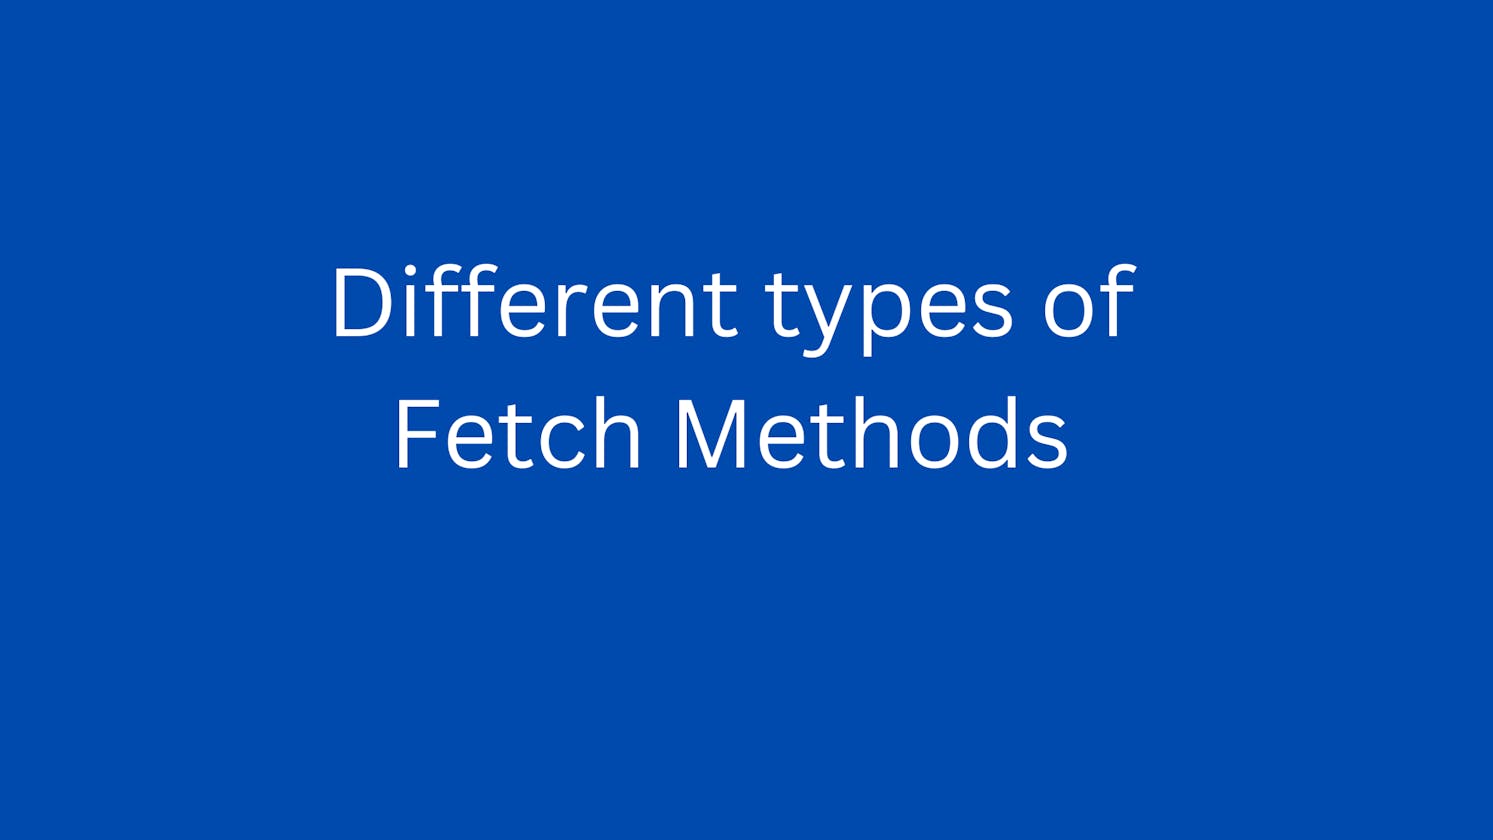 Different types of Fetch Methods